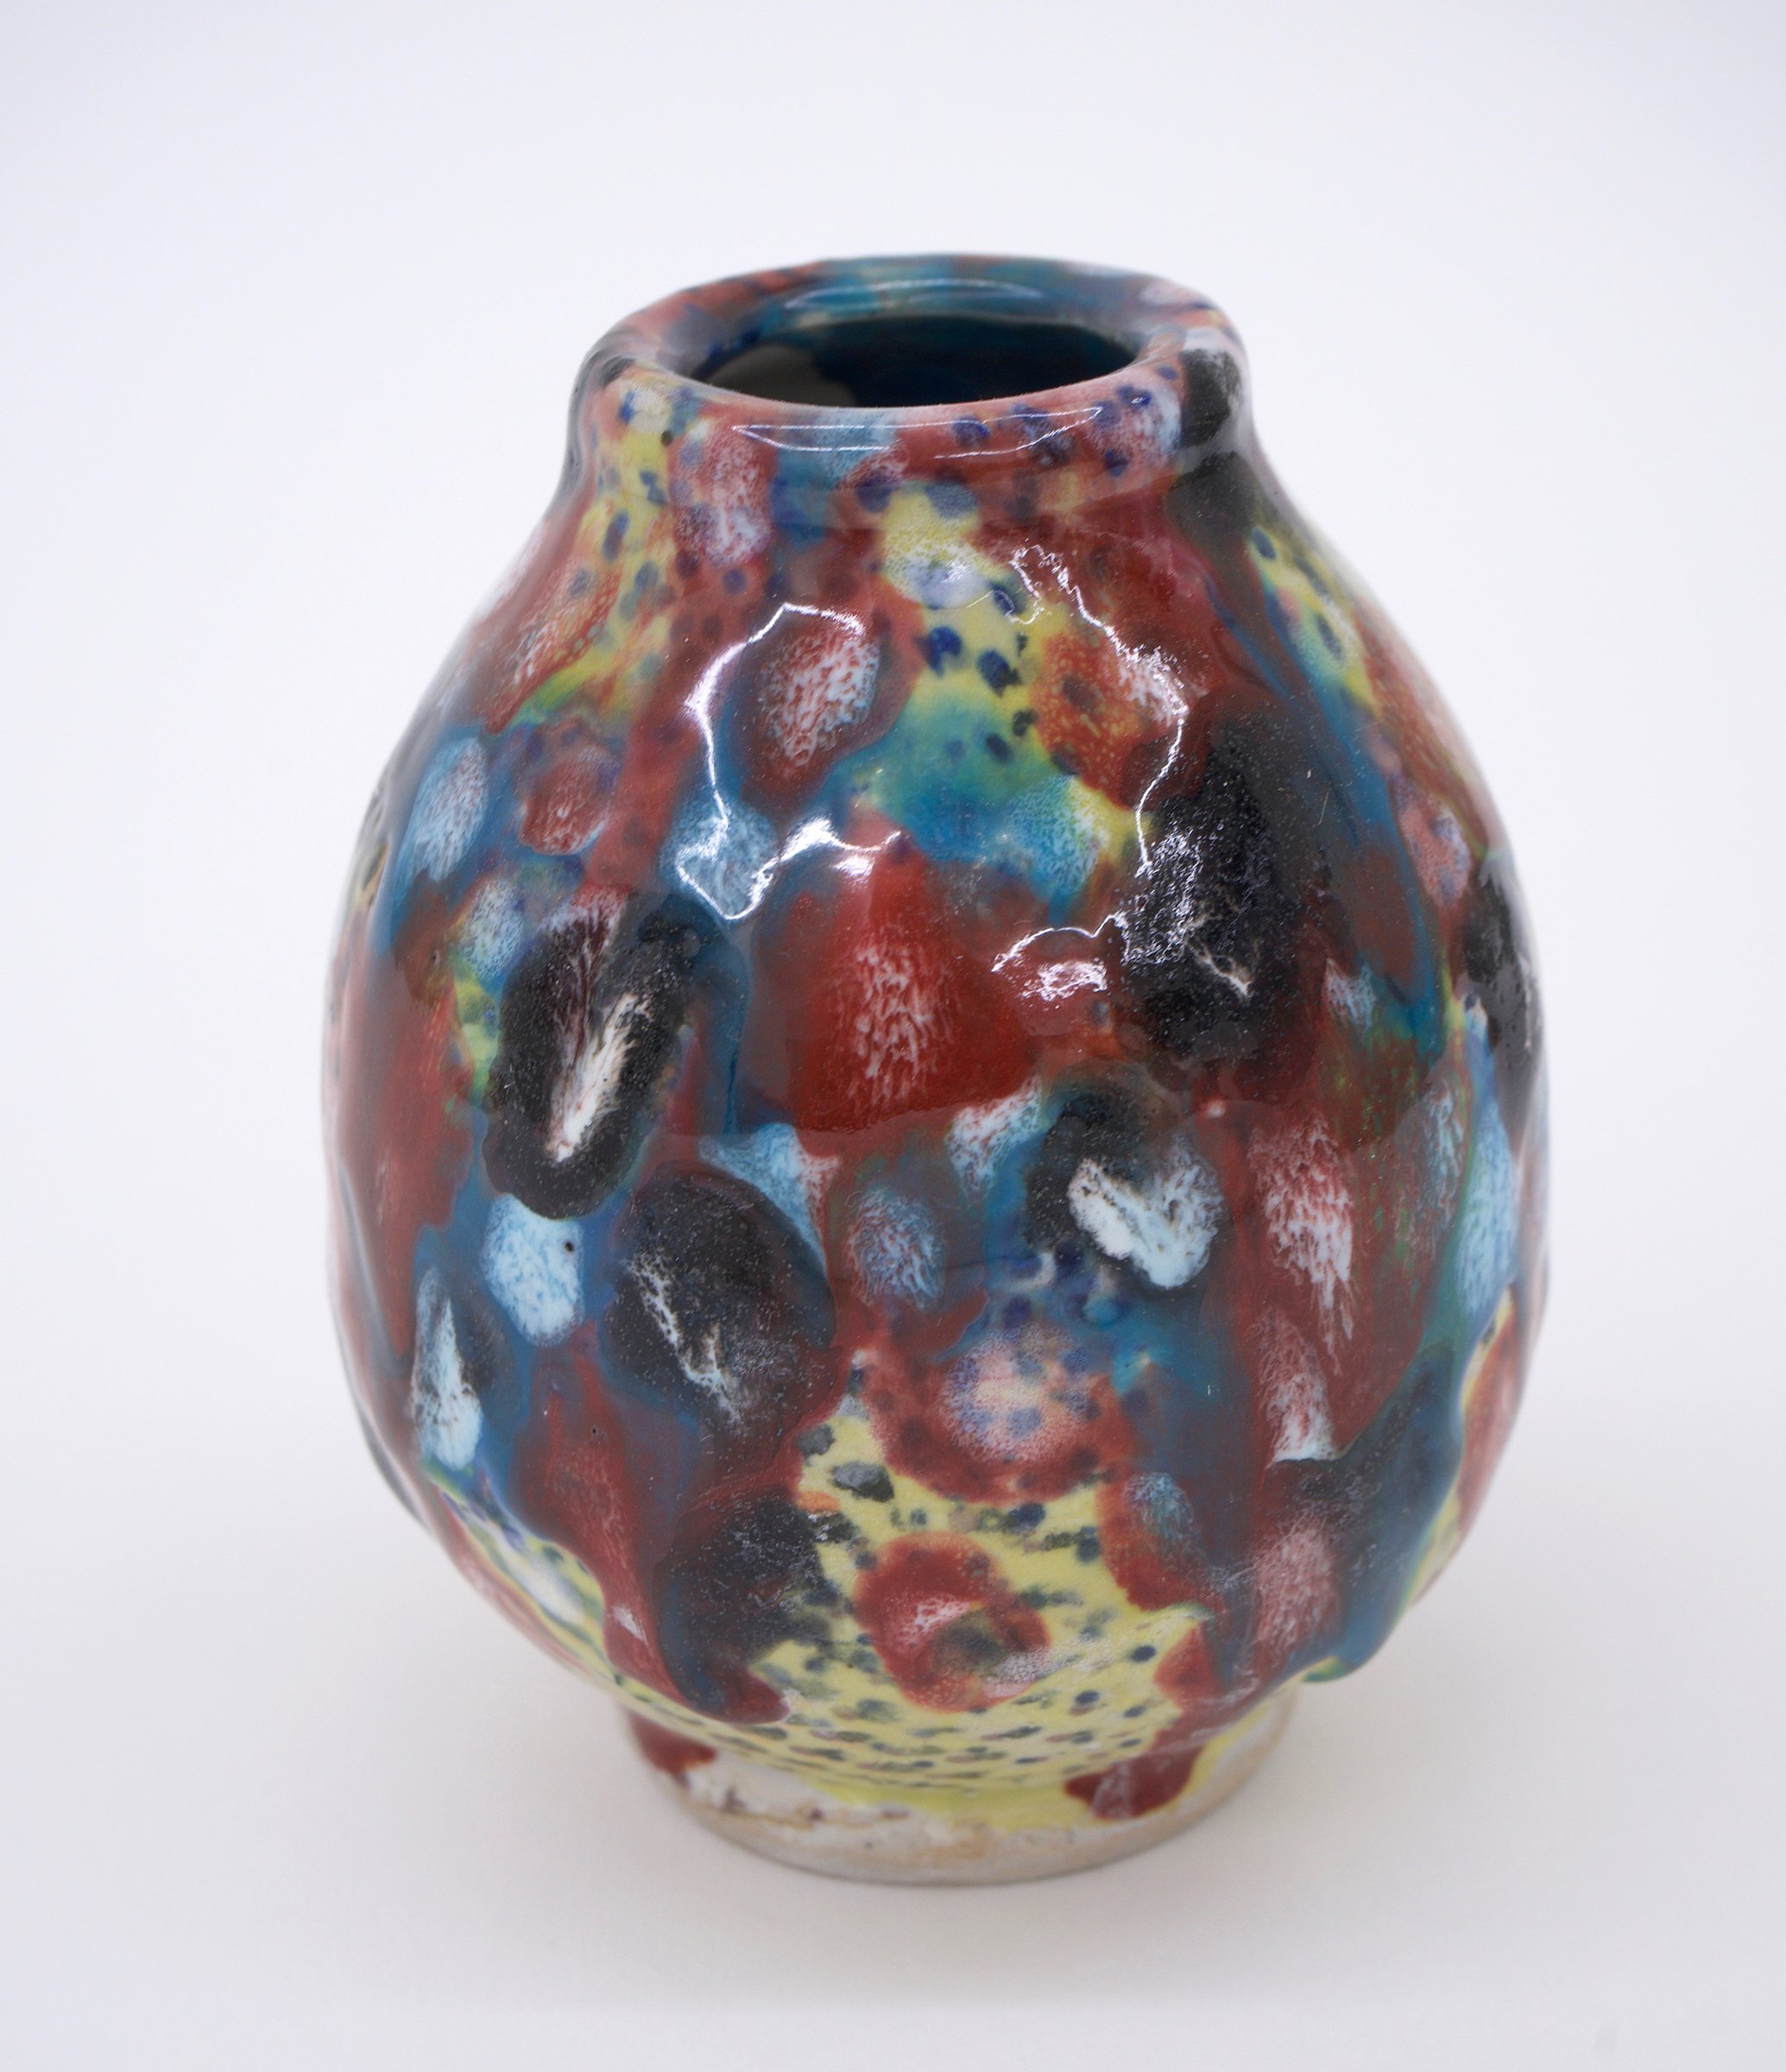   Untitled (Lava Lamps, Mid 2) , 2022 Multiply fired and layered glazes on stoneware 6.5” x 4” 